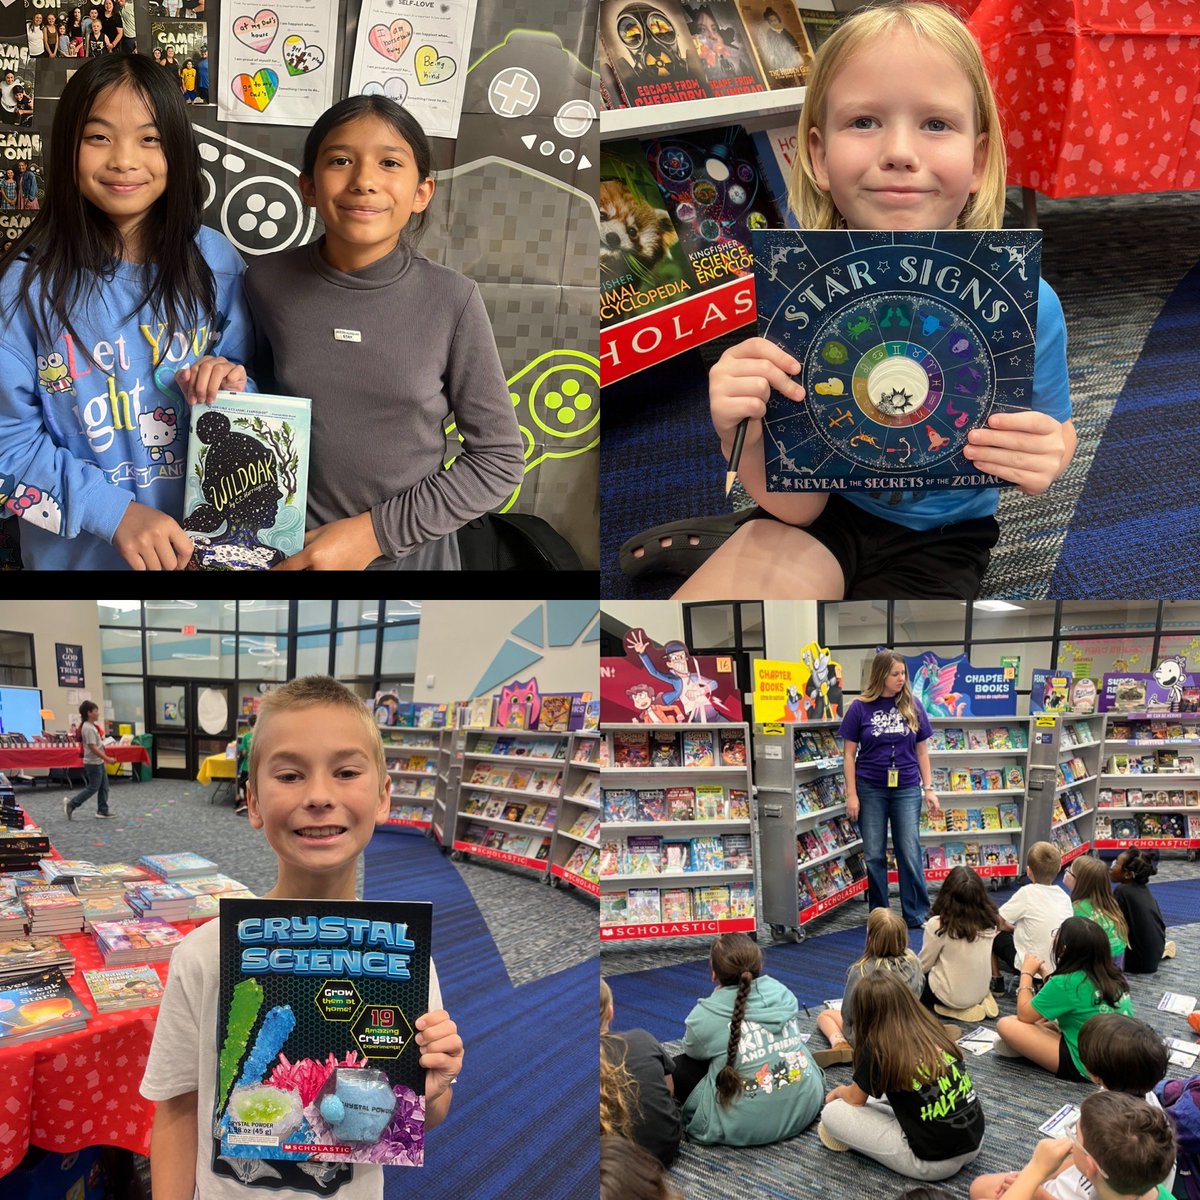 @TISDGOES Book Fair was truly an exploration of many spectacular journeys! @GOESLibrarian led my tigers in creating wish list, and later selecting phenomenal books to take home! #GObethegamechanger.